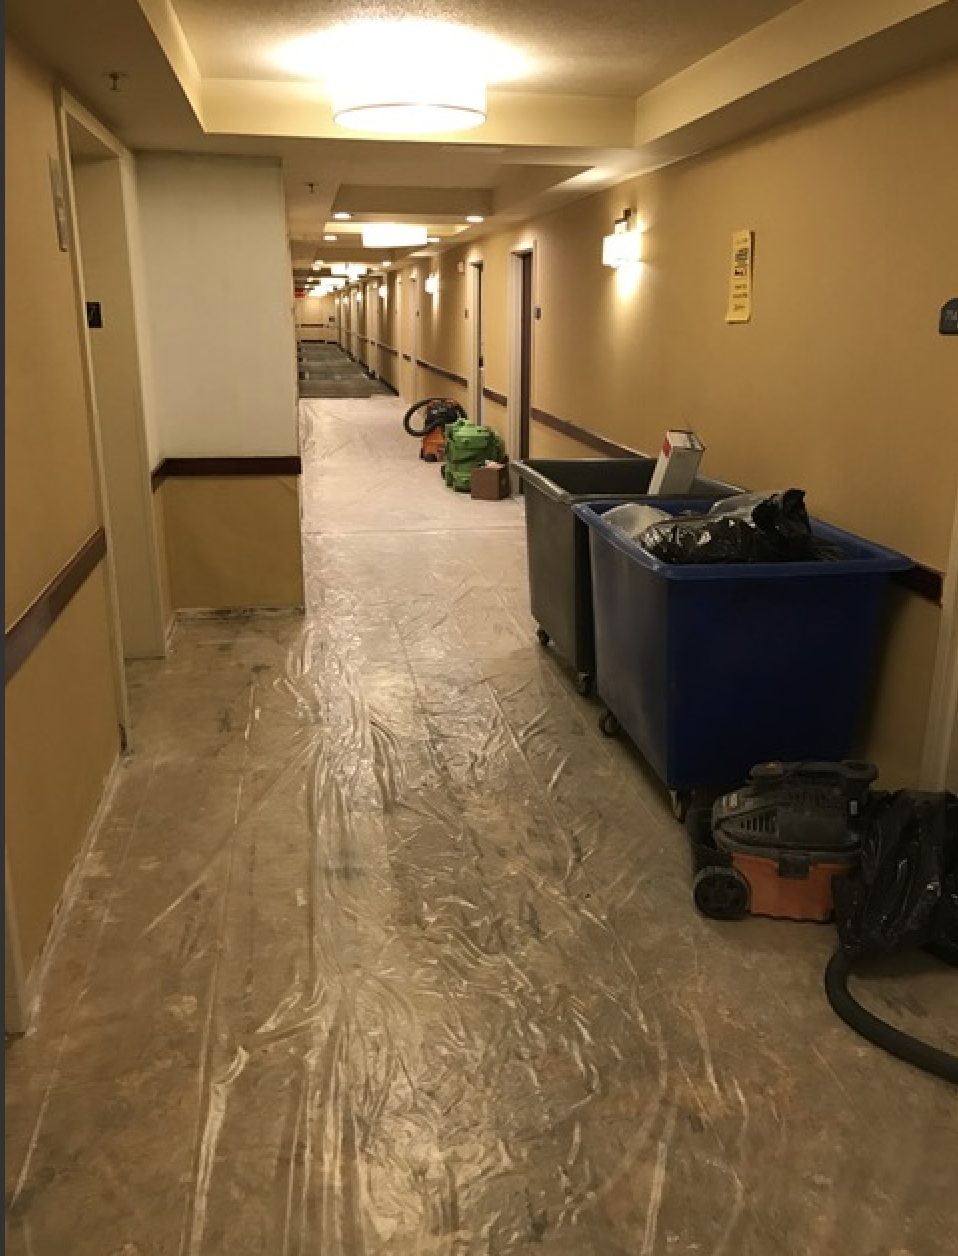 Our SERVPRO of Ozone Park/Jamaica Bay team is hard at work on a commercial water damage cleanup!